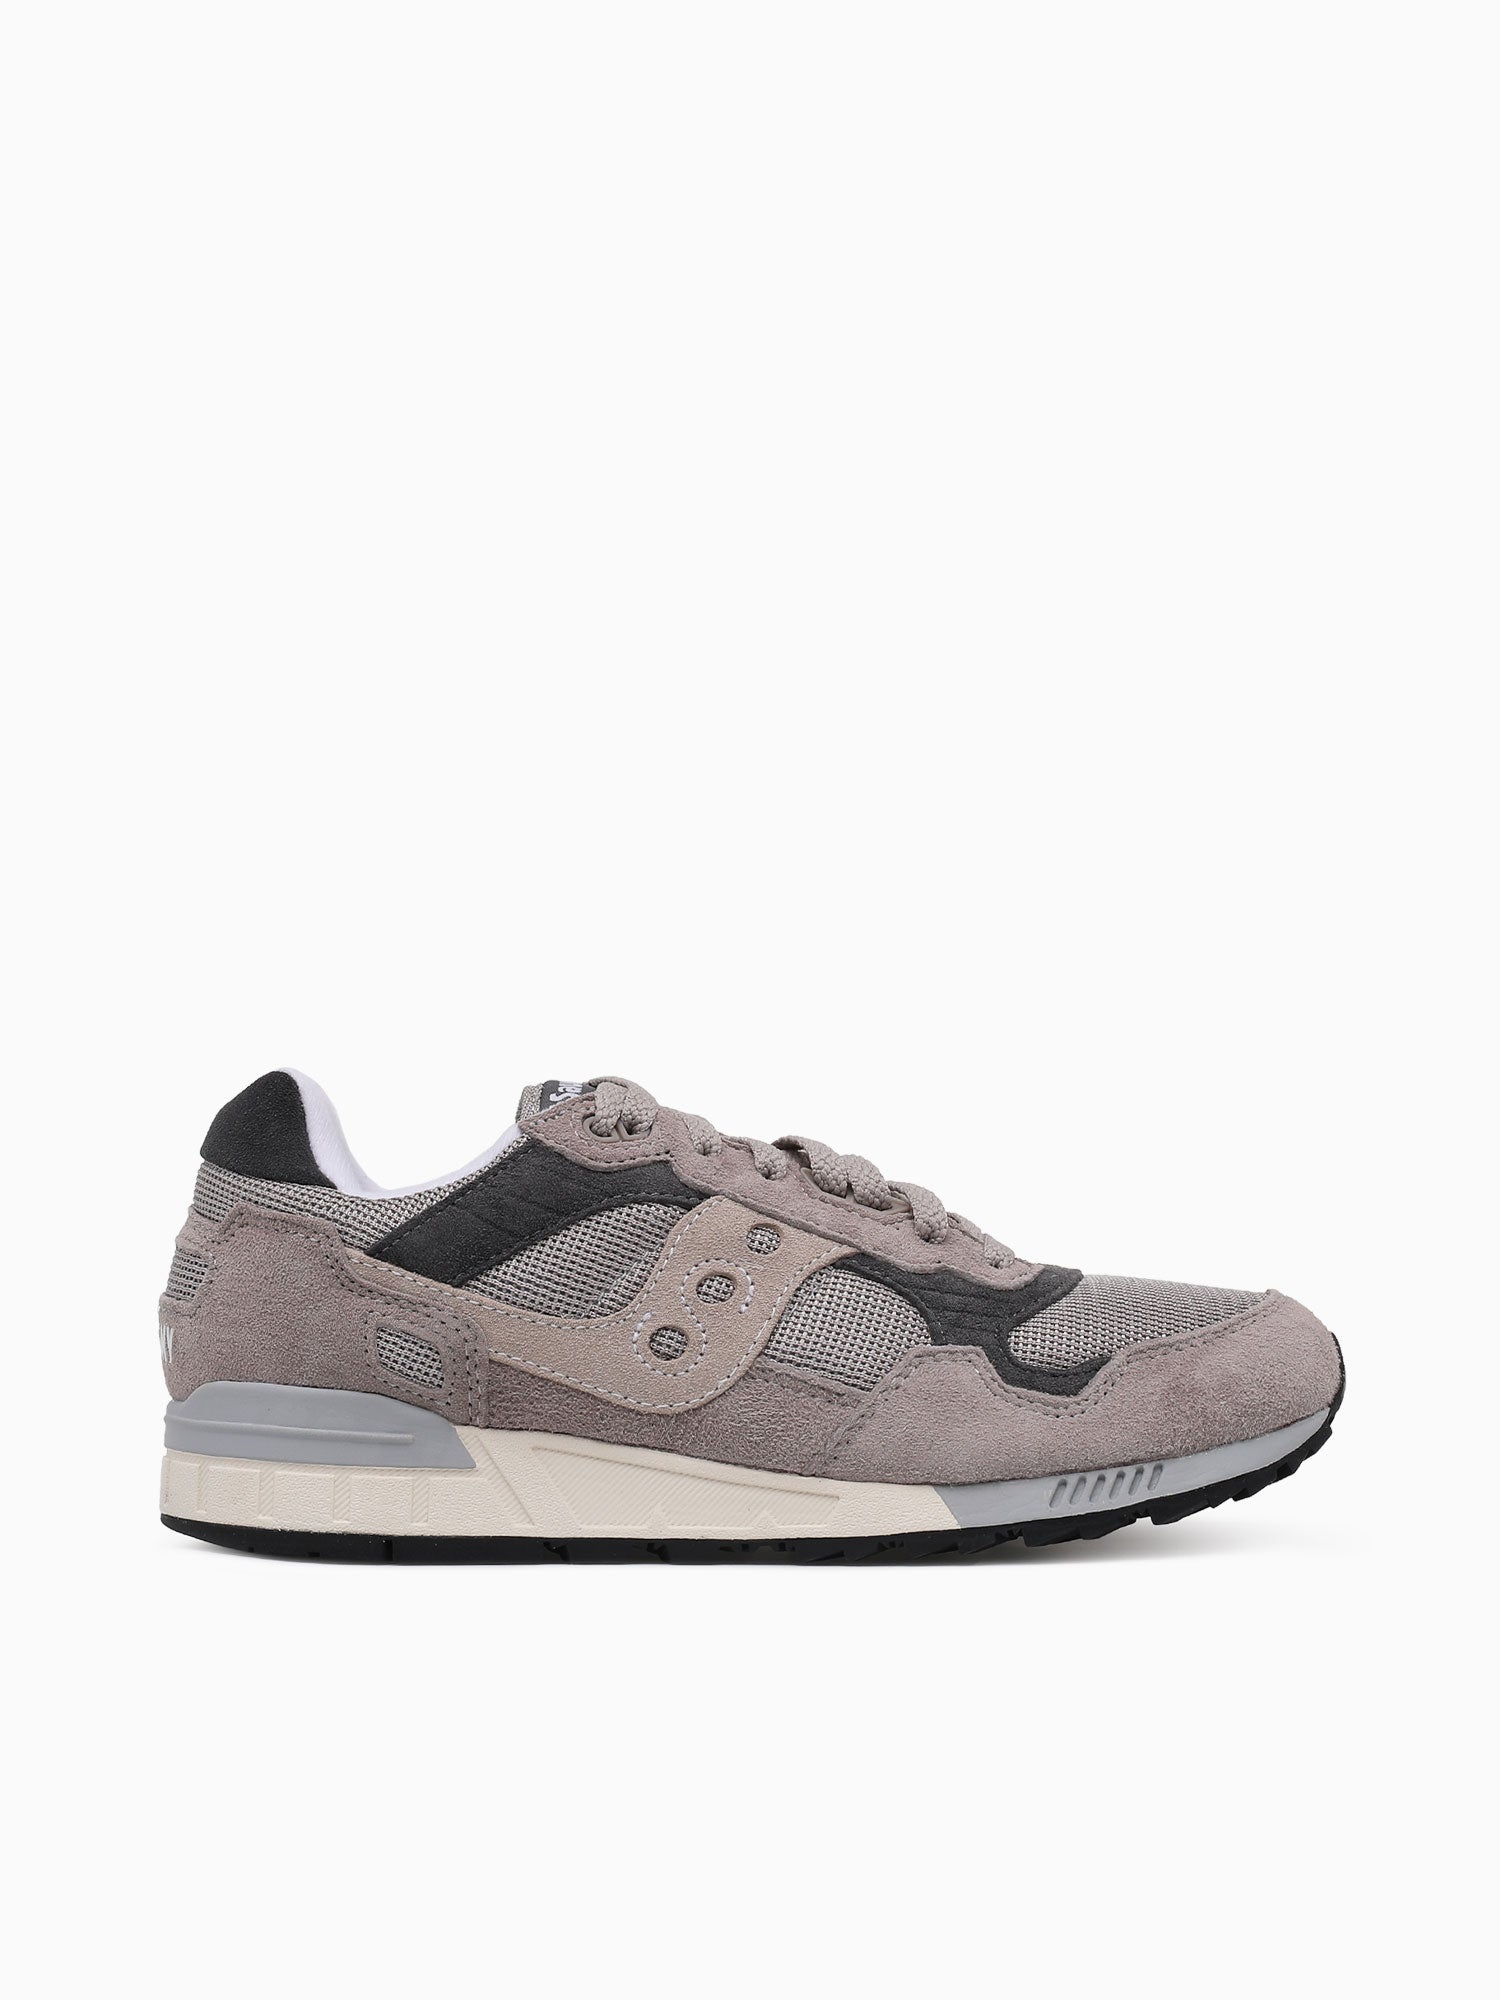 Shadow 5000 Sand White suede Mesh Taupe / 7 / M